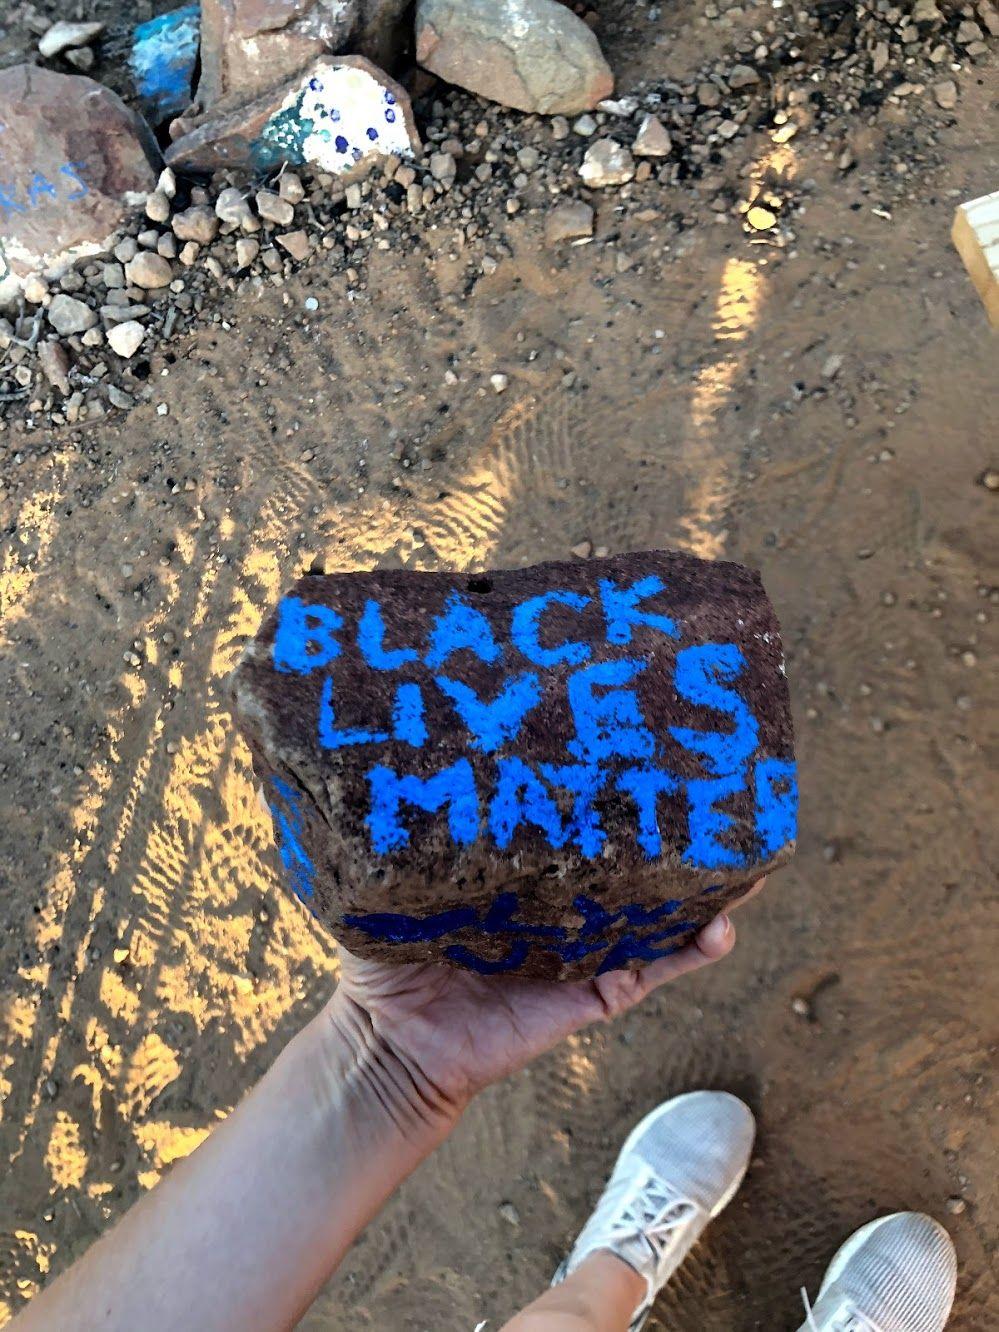 A rock with the words "Black Lives Matter" painted in blue.